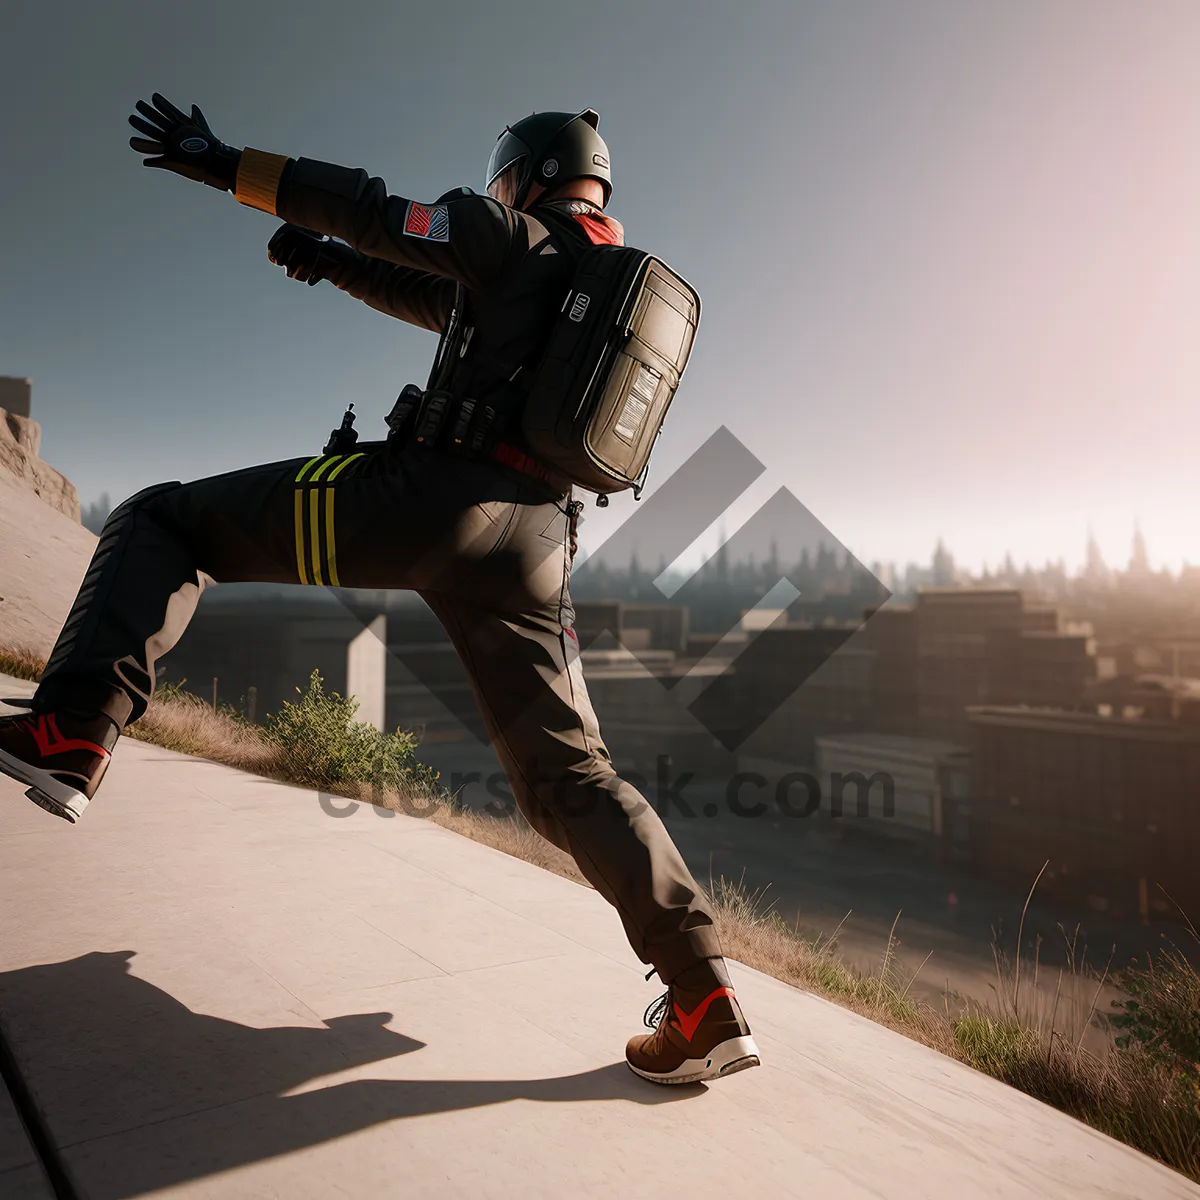 Picture of Thrilling Skateboard Jump with Action-Packed Energy